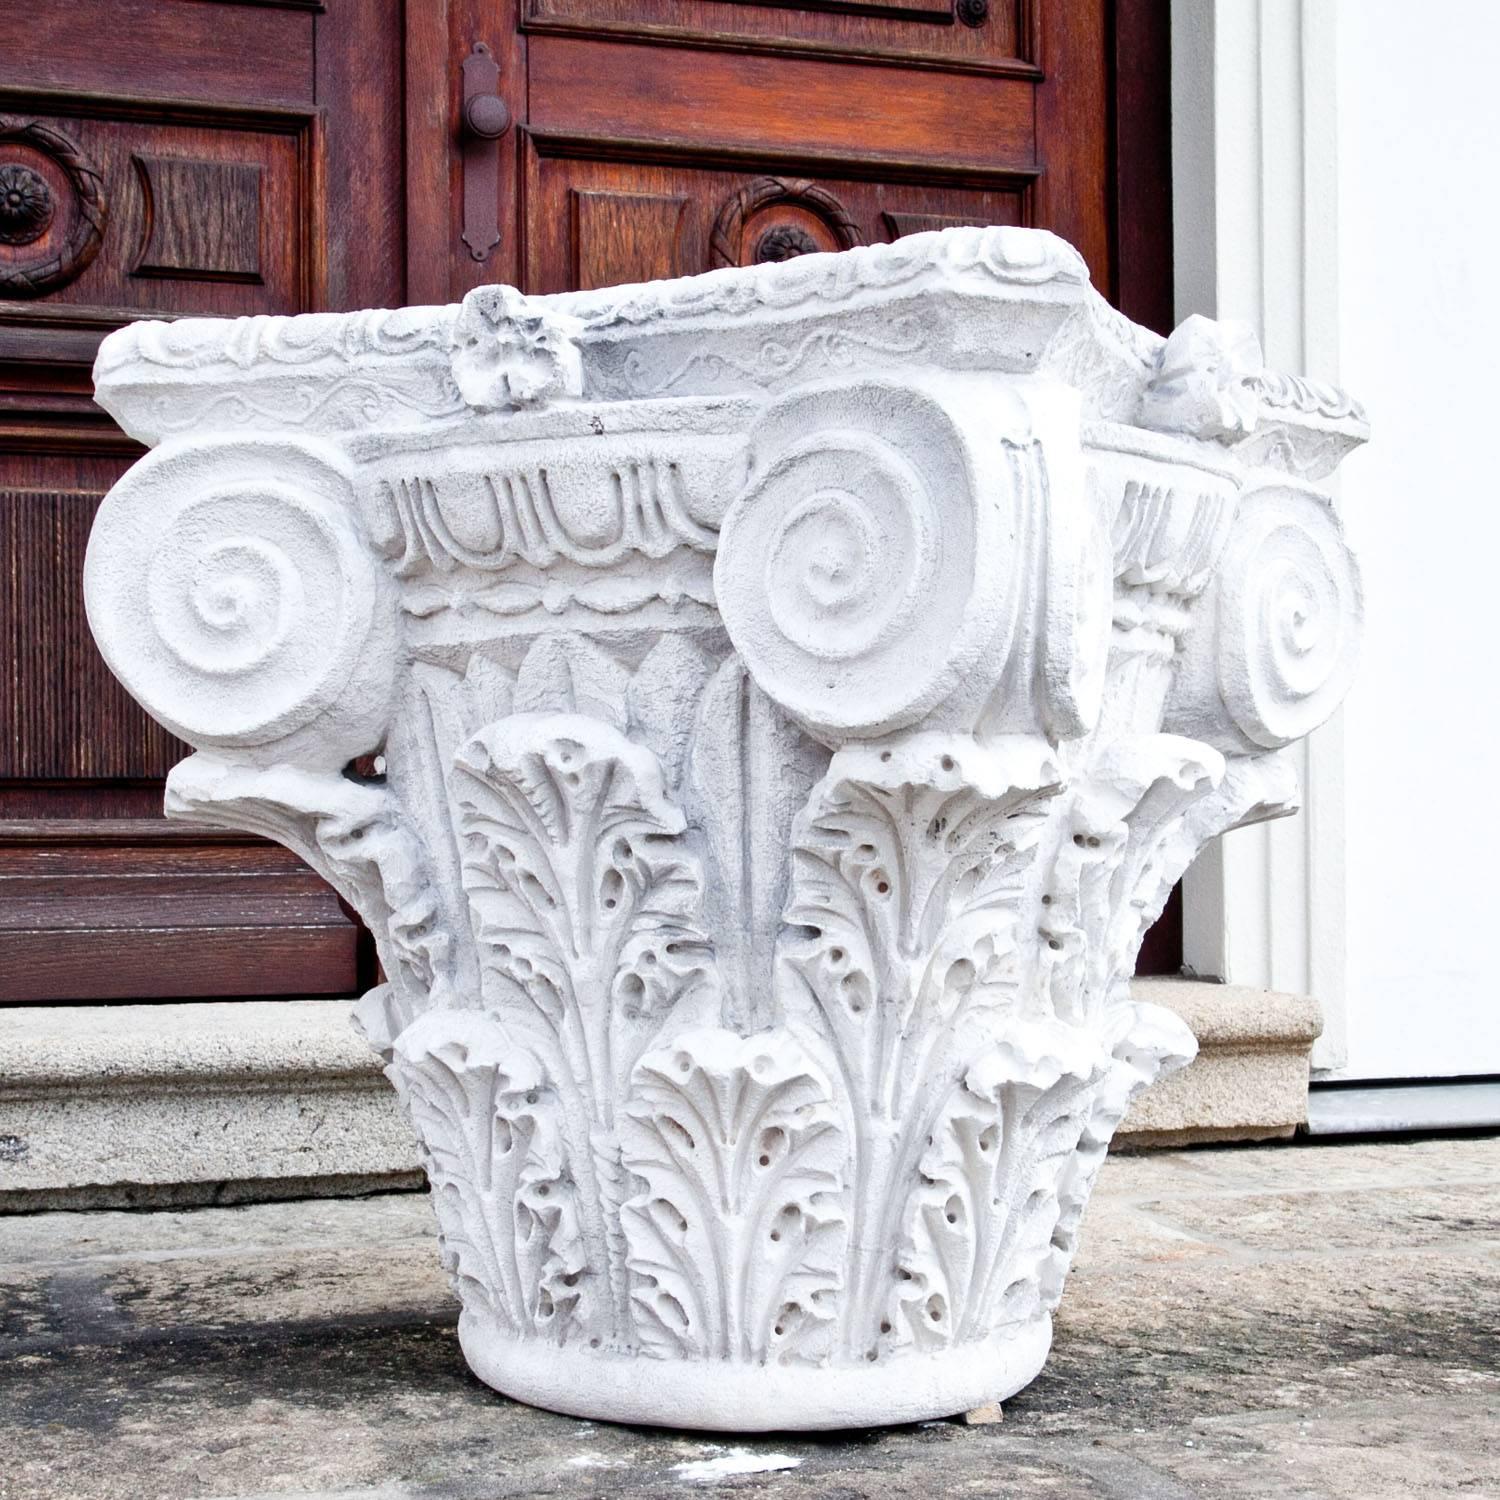 Hand-carved Corinthian capital with a square shaped base, hand-carved out of natural stone.